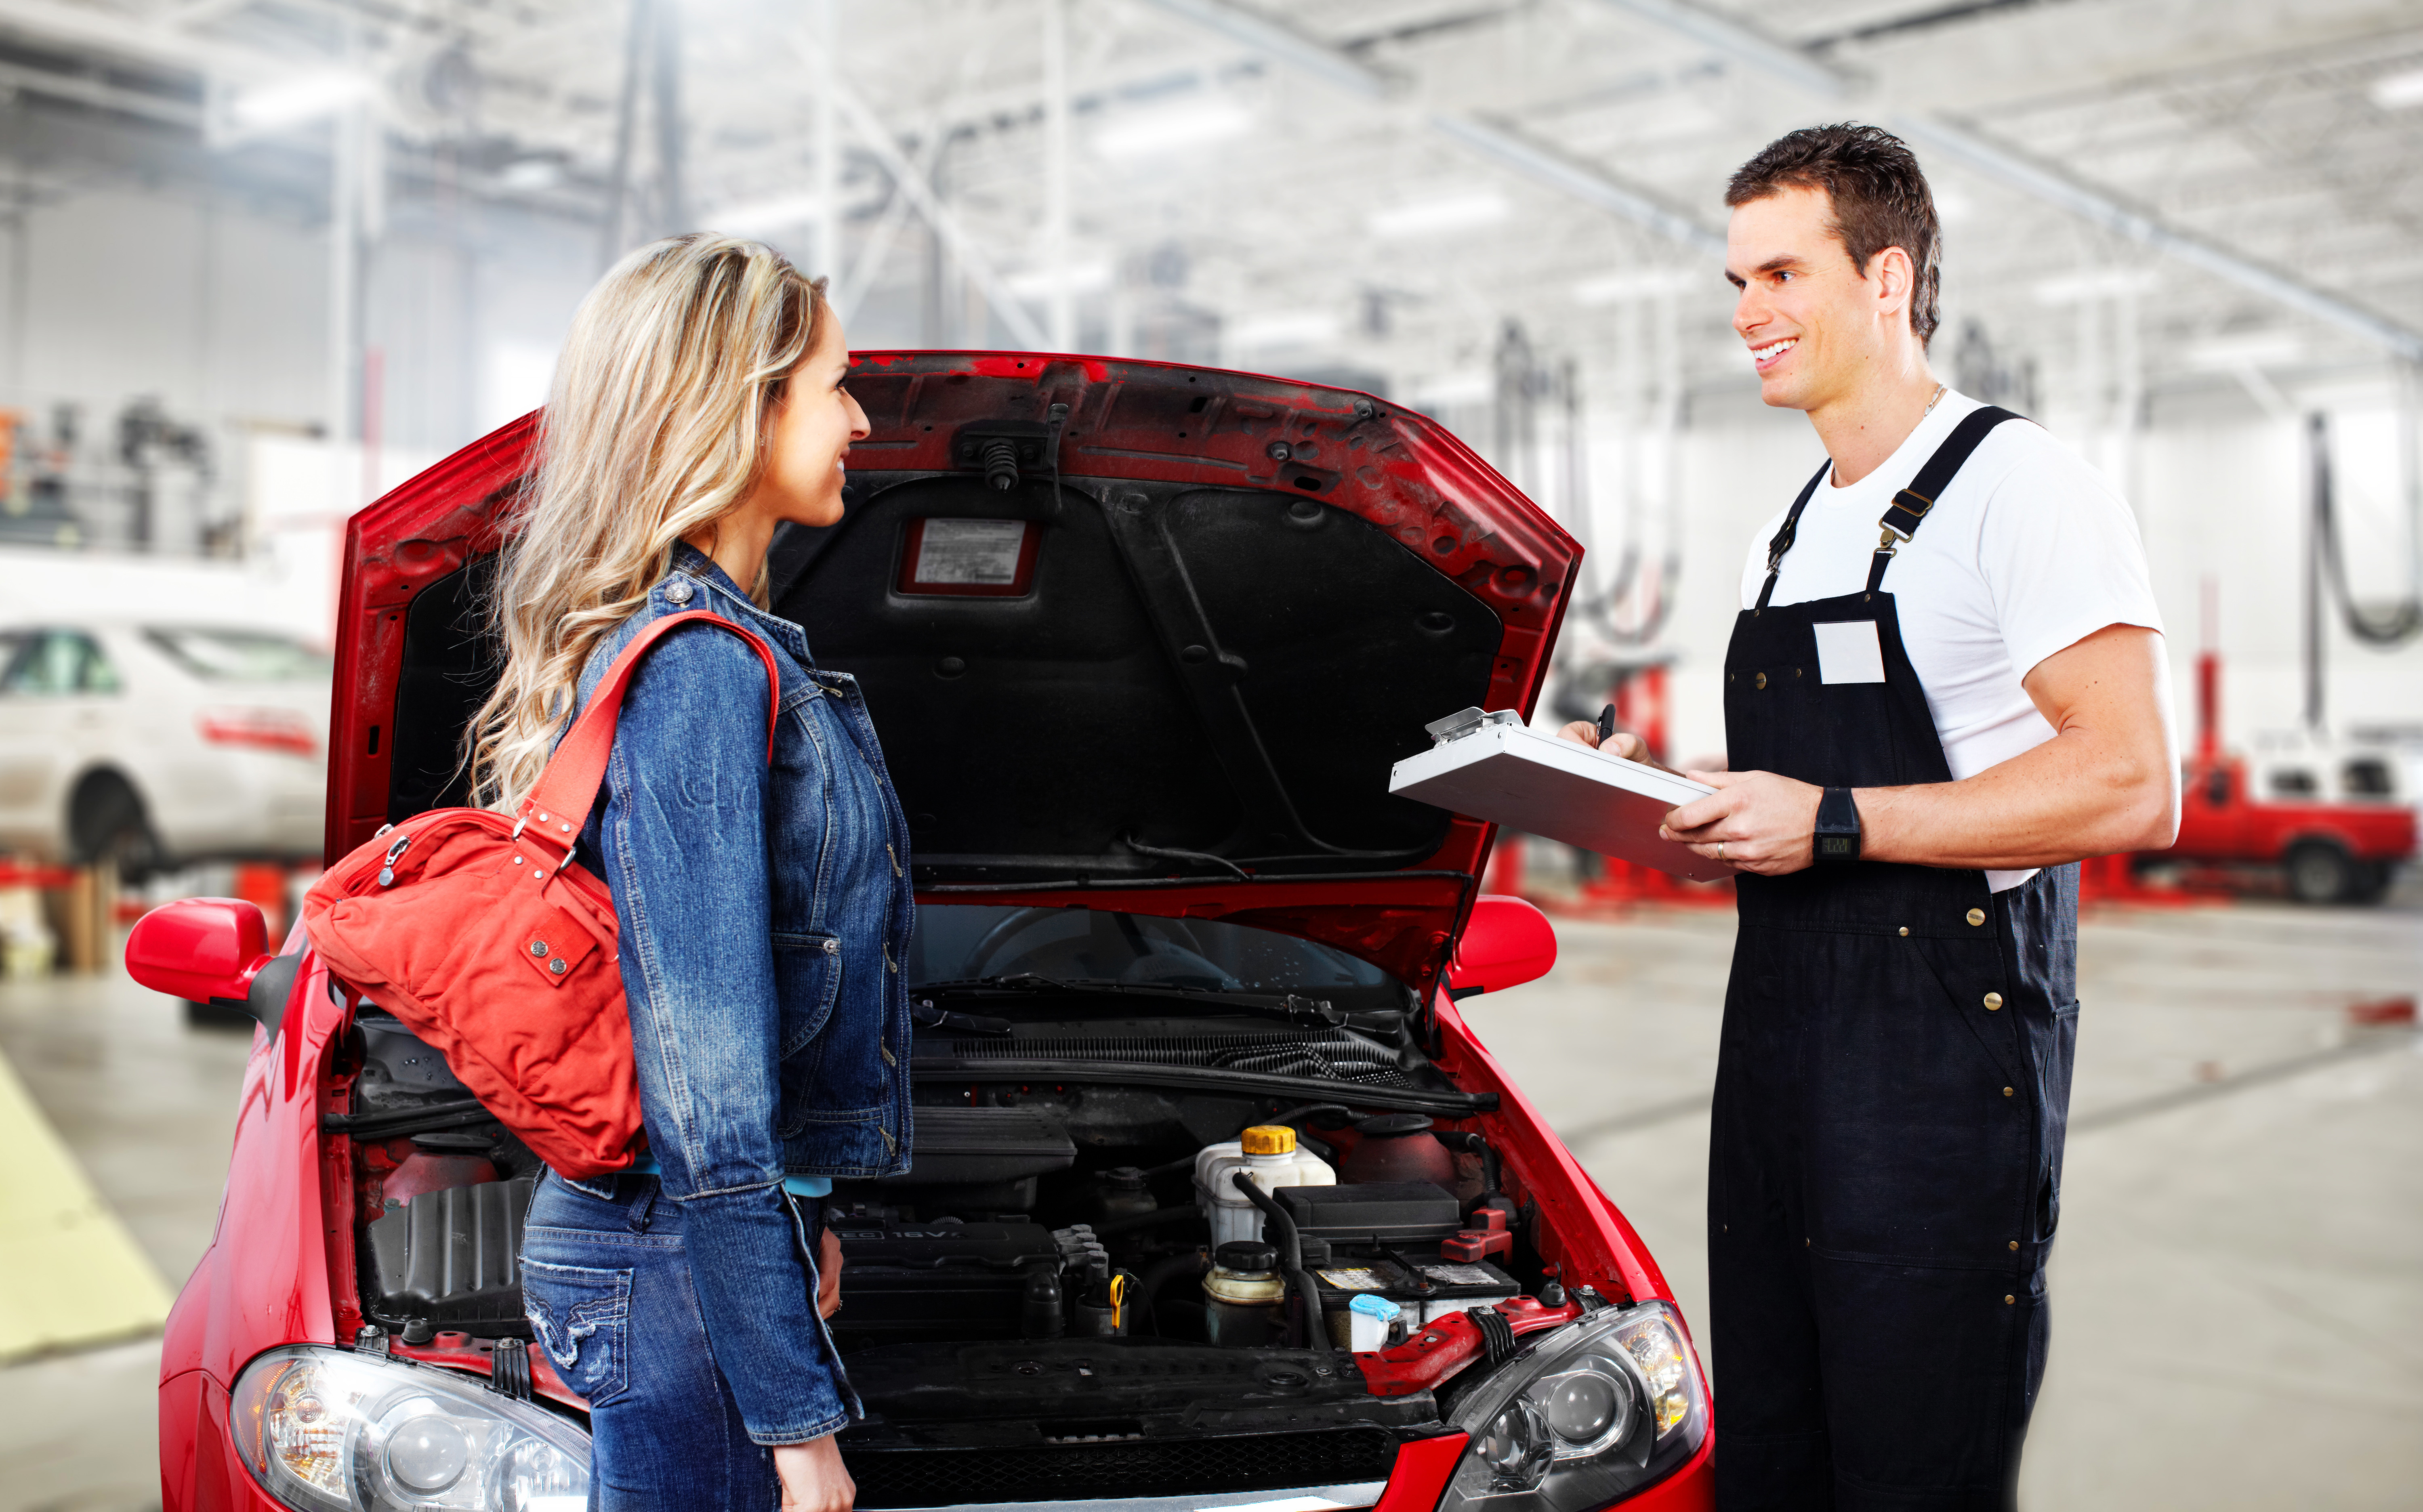 Car mechanic reviewing diagnosis with customer